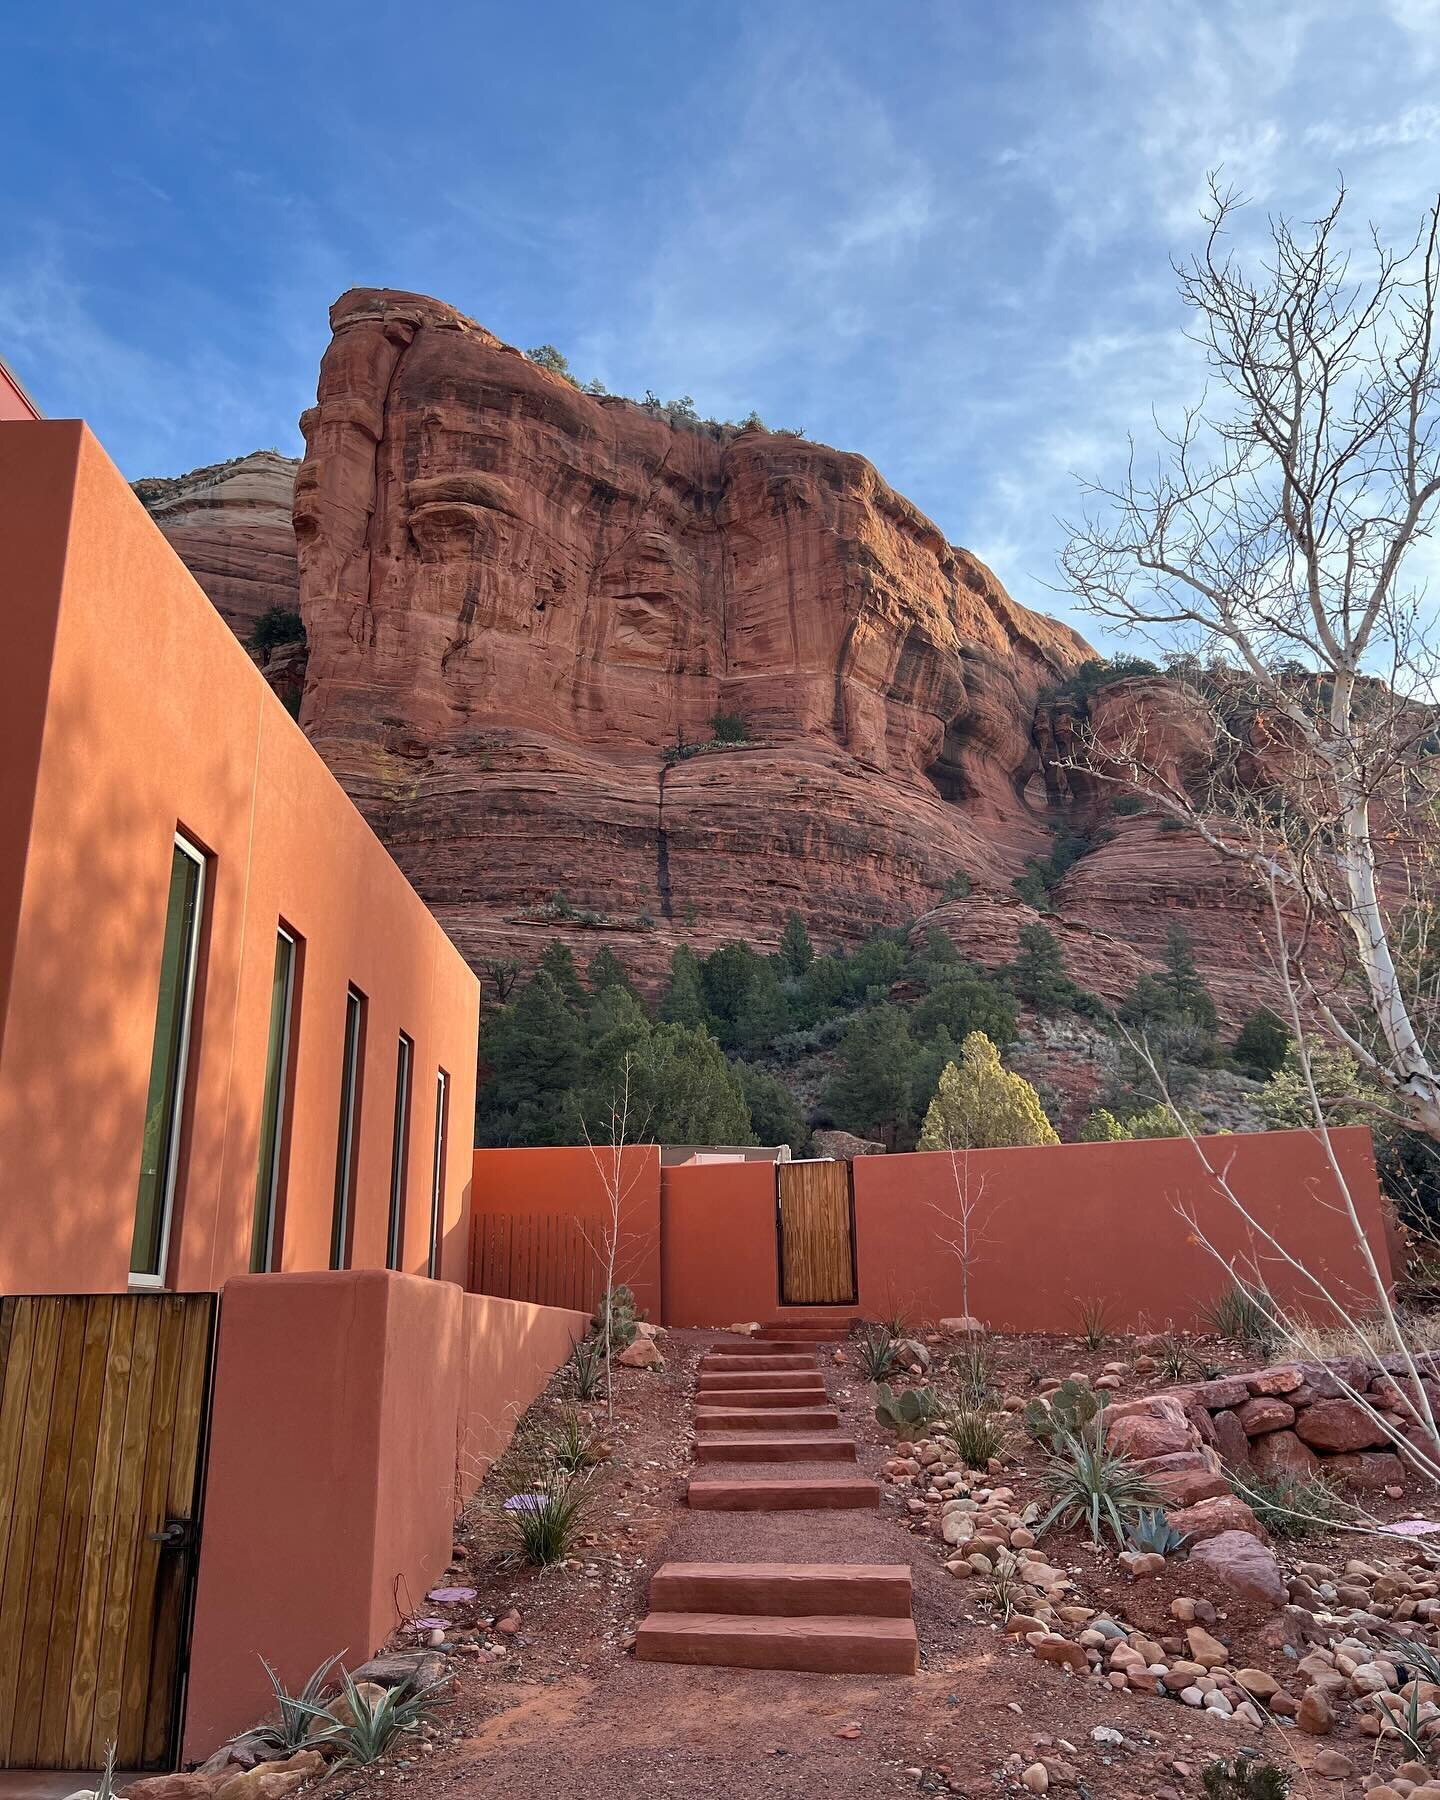 Had an amazing spa retreat in Sedona. Many thanks to the entire staff at @mii_amo_spa for bringing me back to life after a very stressful few months. Everyone I interacted with was so warm and welcoming. I will definitely be coming back to this one!